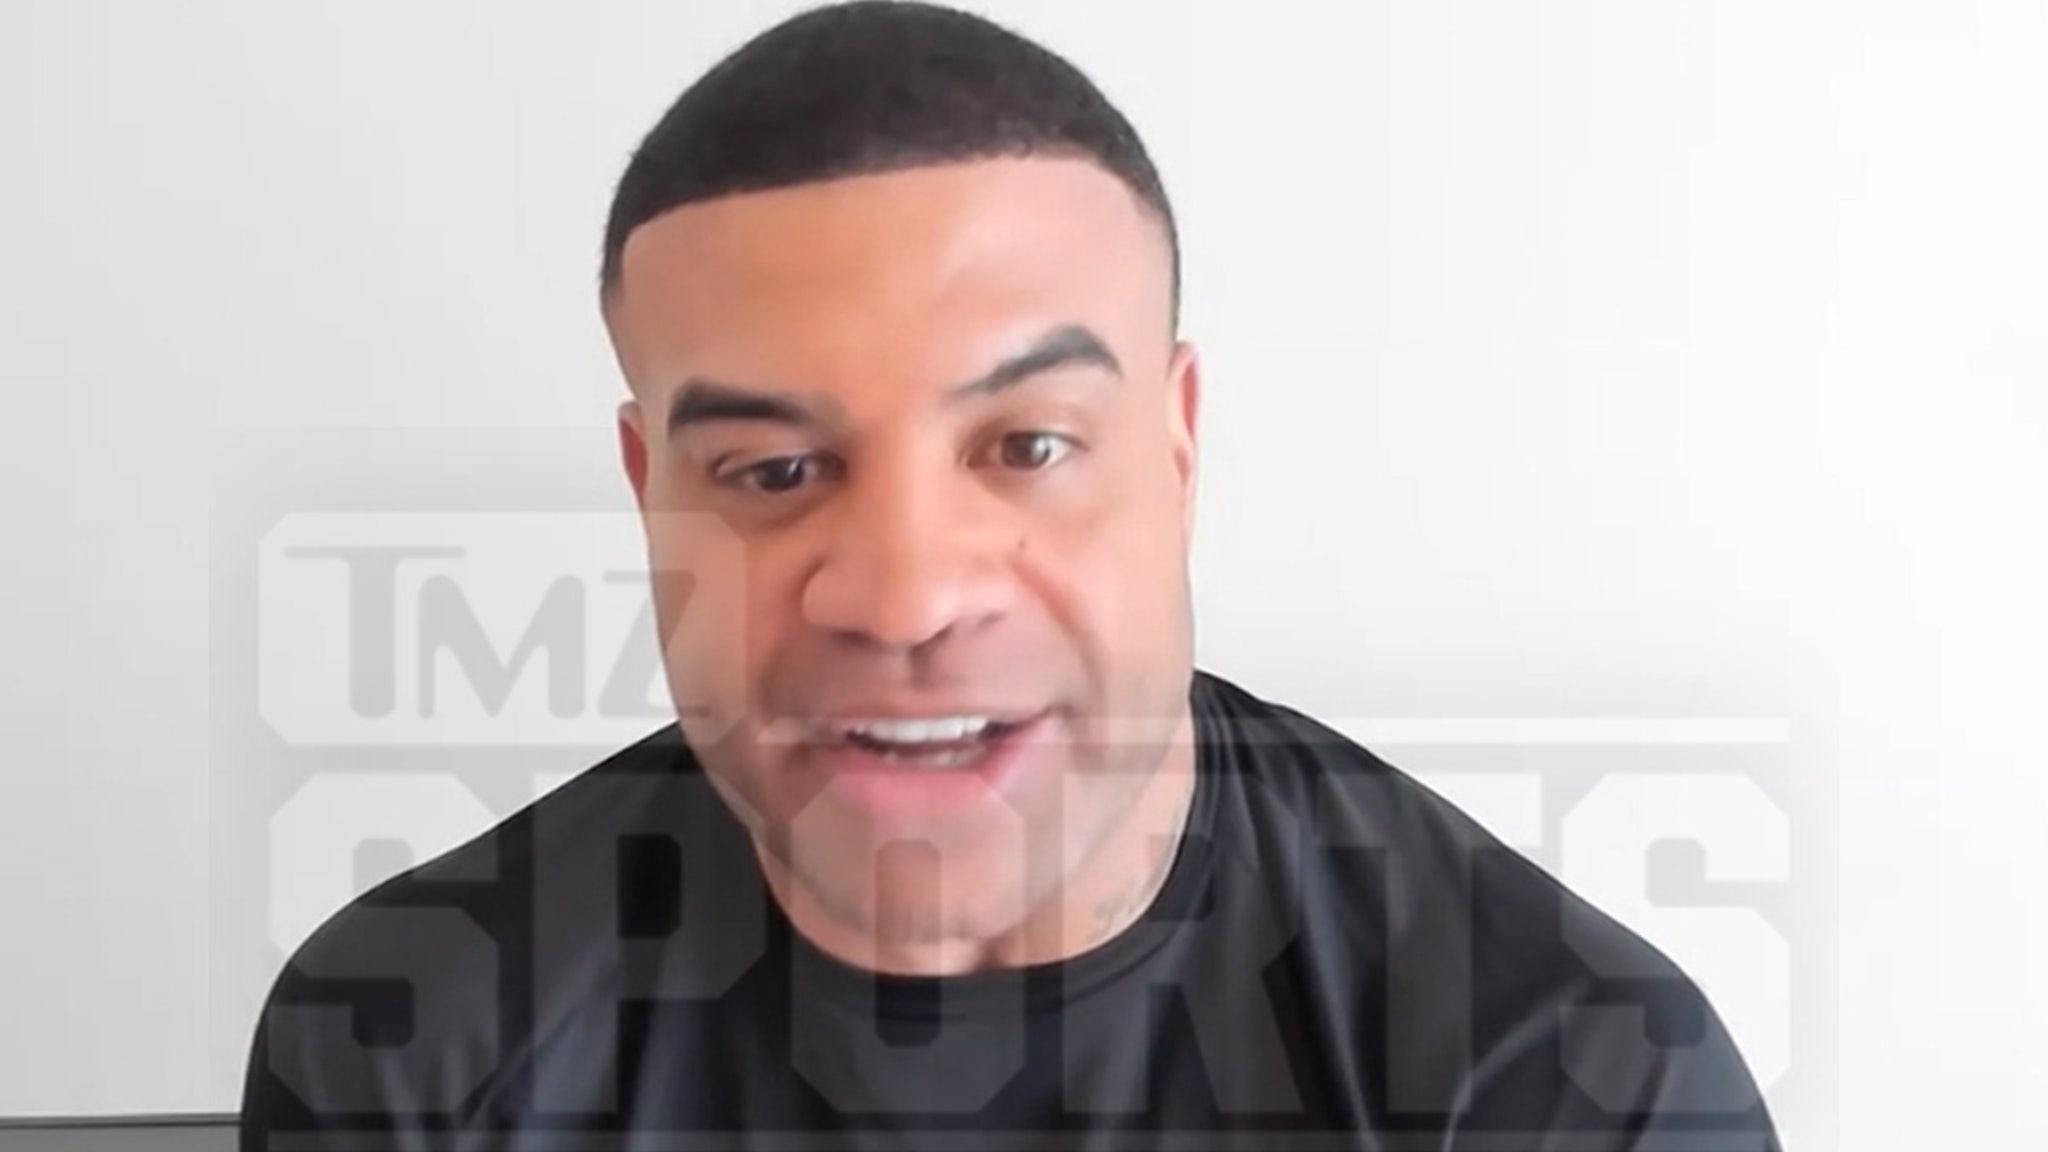 Shawne Merriman Thrilled Over Chargers’ Jim Harbaugh Hire, ‘Match Made In Heaven’